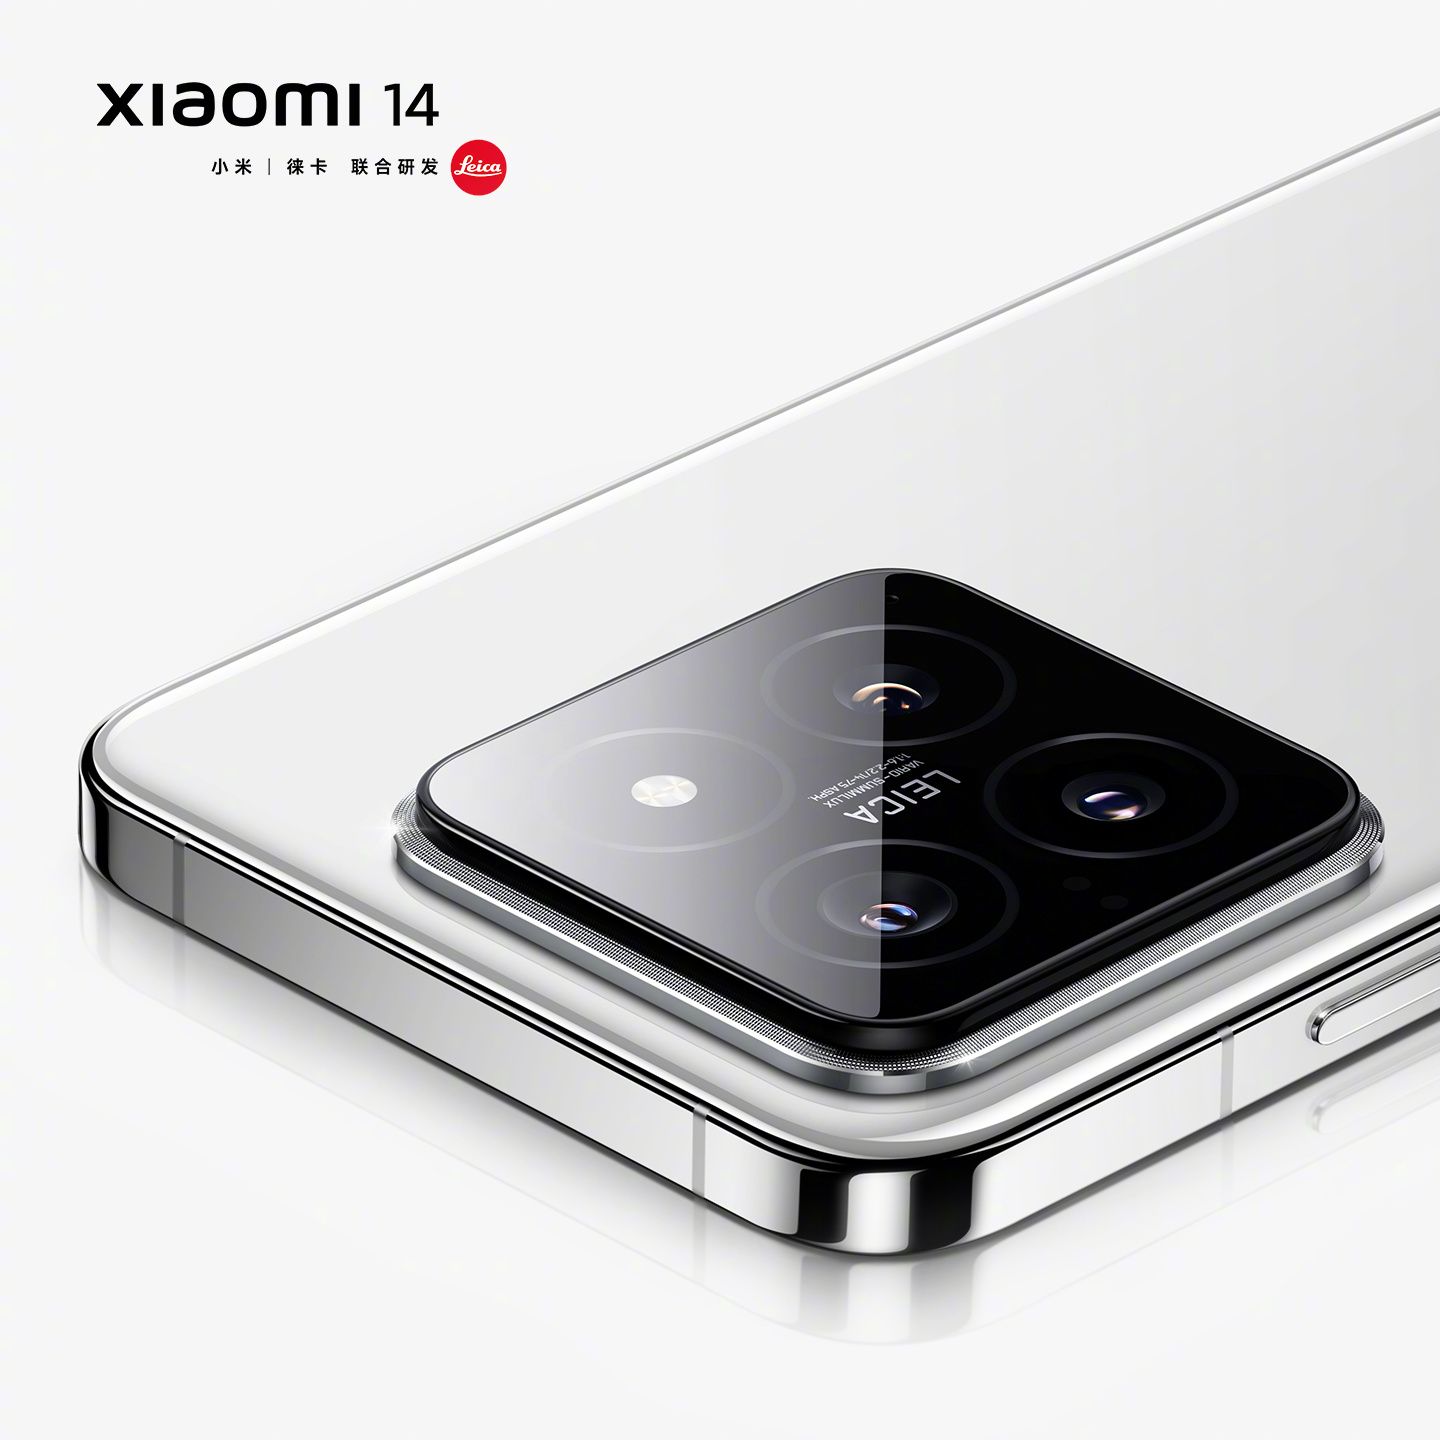 Xiaomi 14 Pro smartphone packs a 3000 nit display, Snapdragon 8